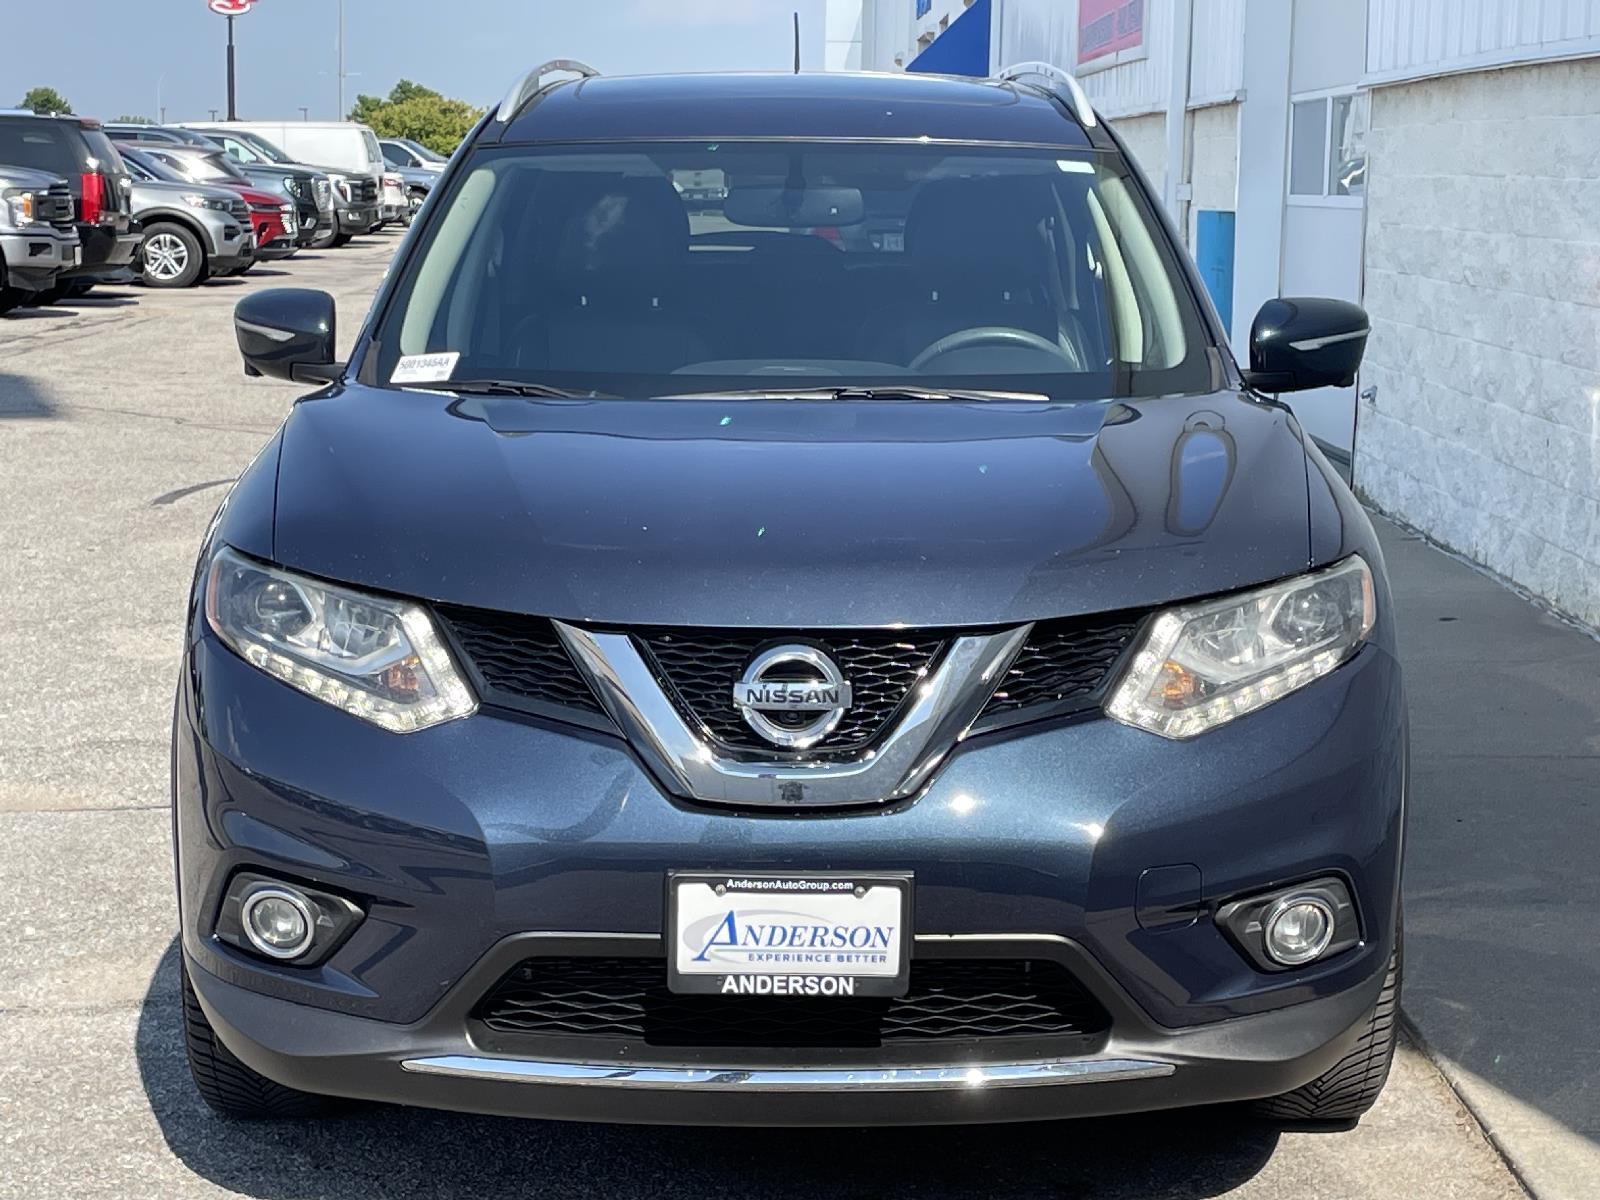 Used 2015 Nissan Rogue SL SUV for sale in Lincoln NE